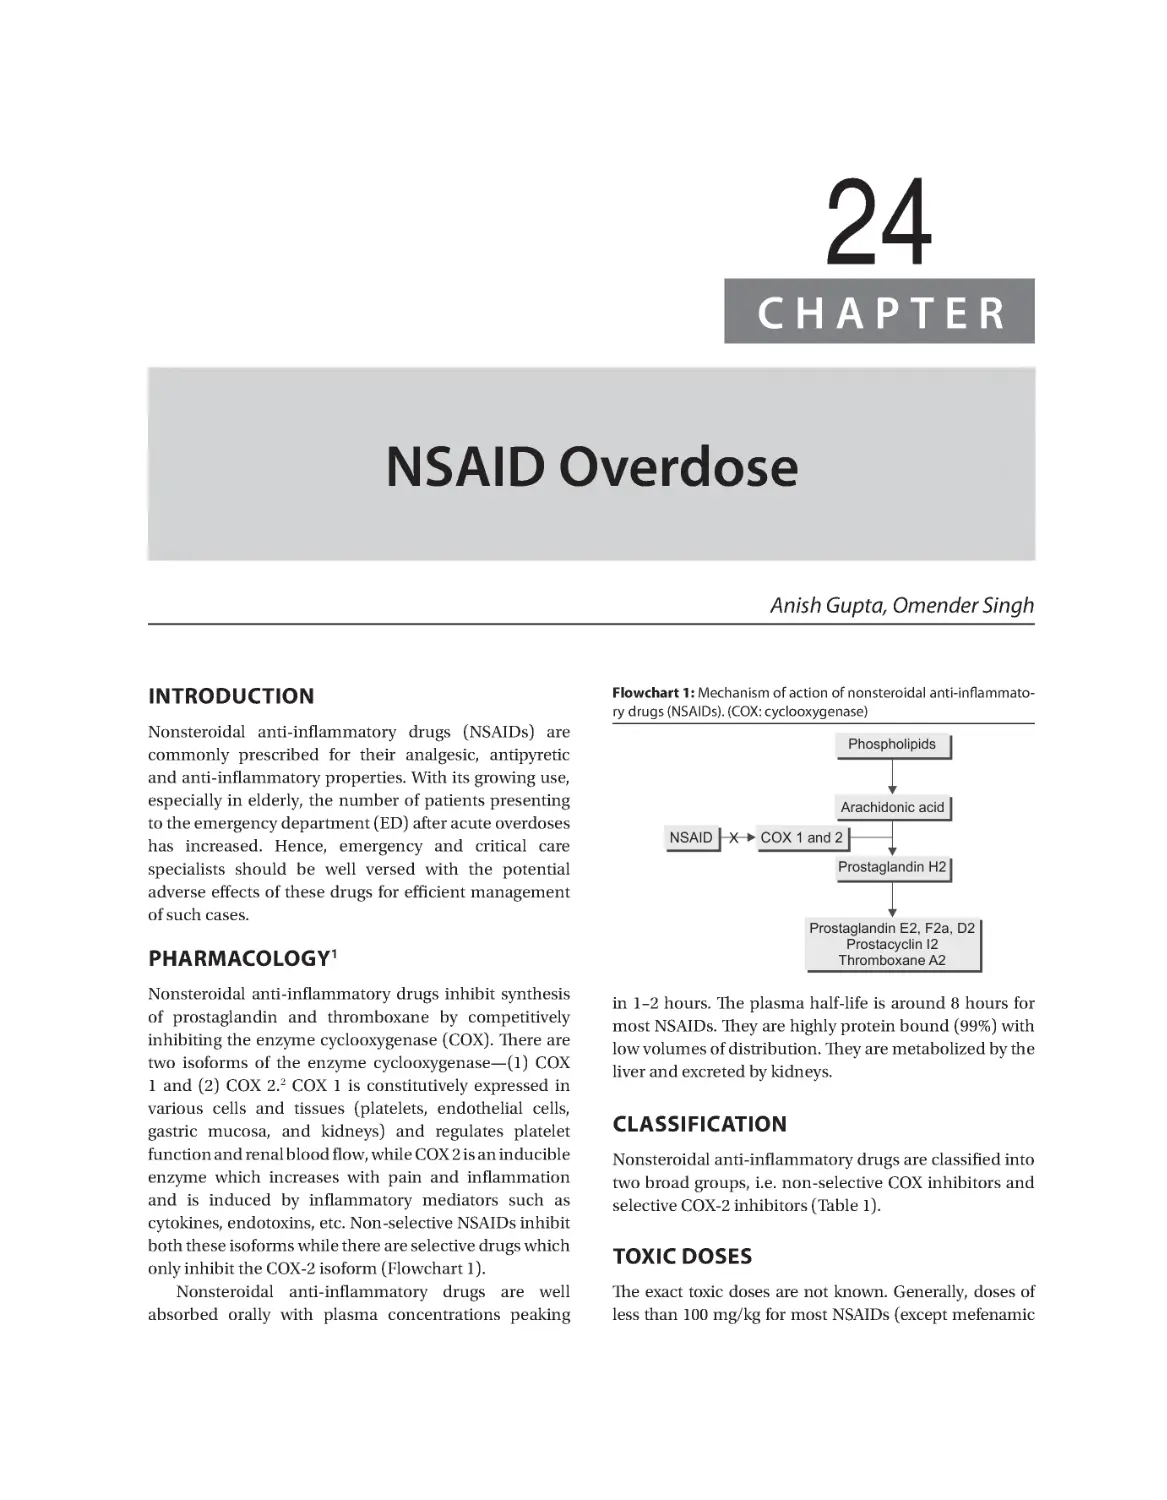 Chapter 24: NSAID Overdose